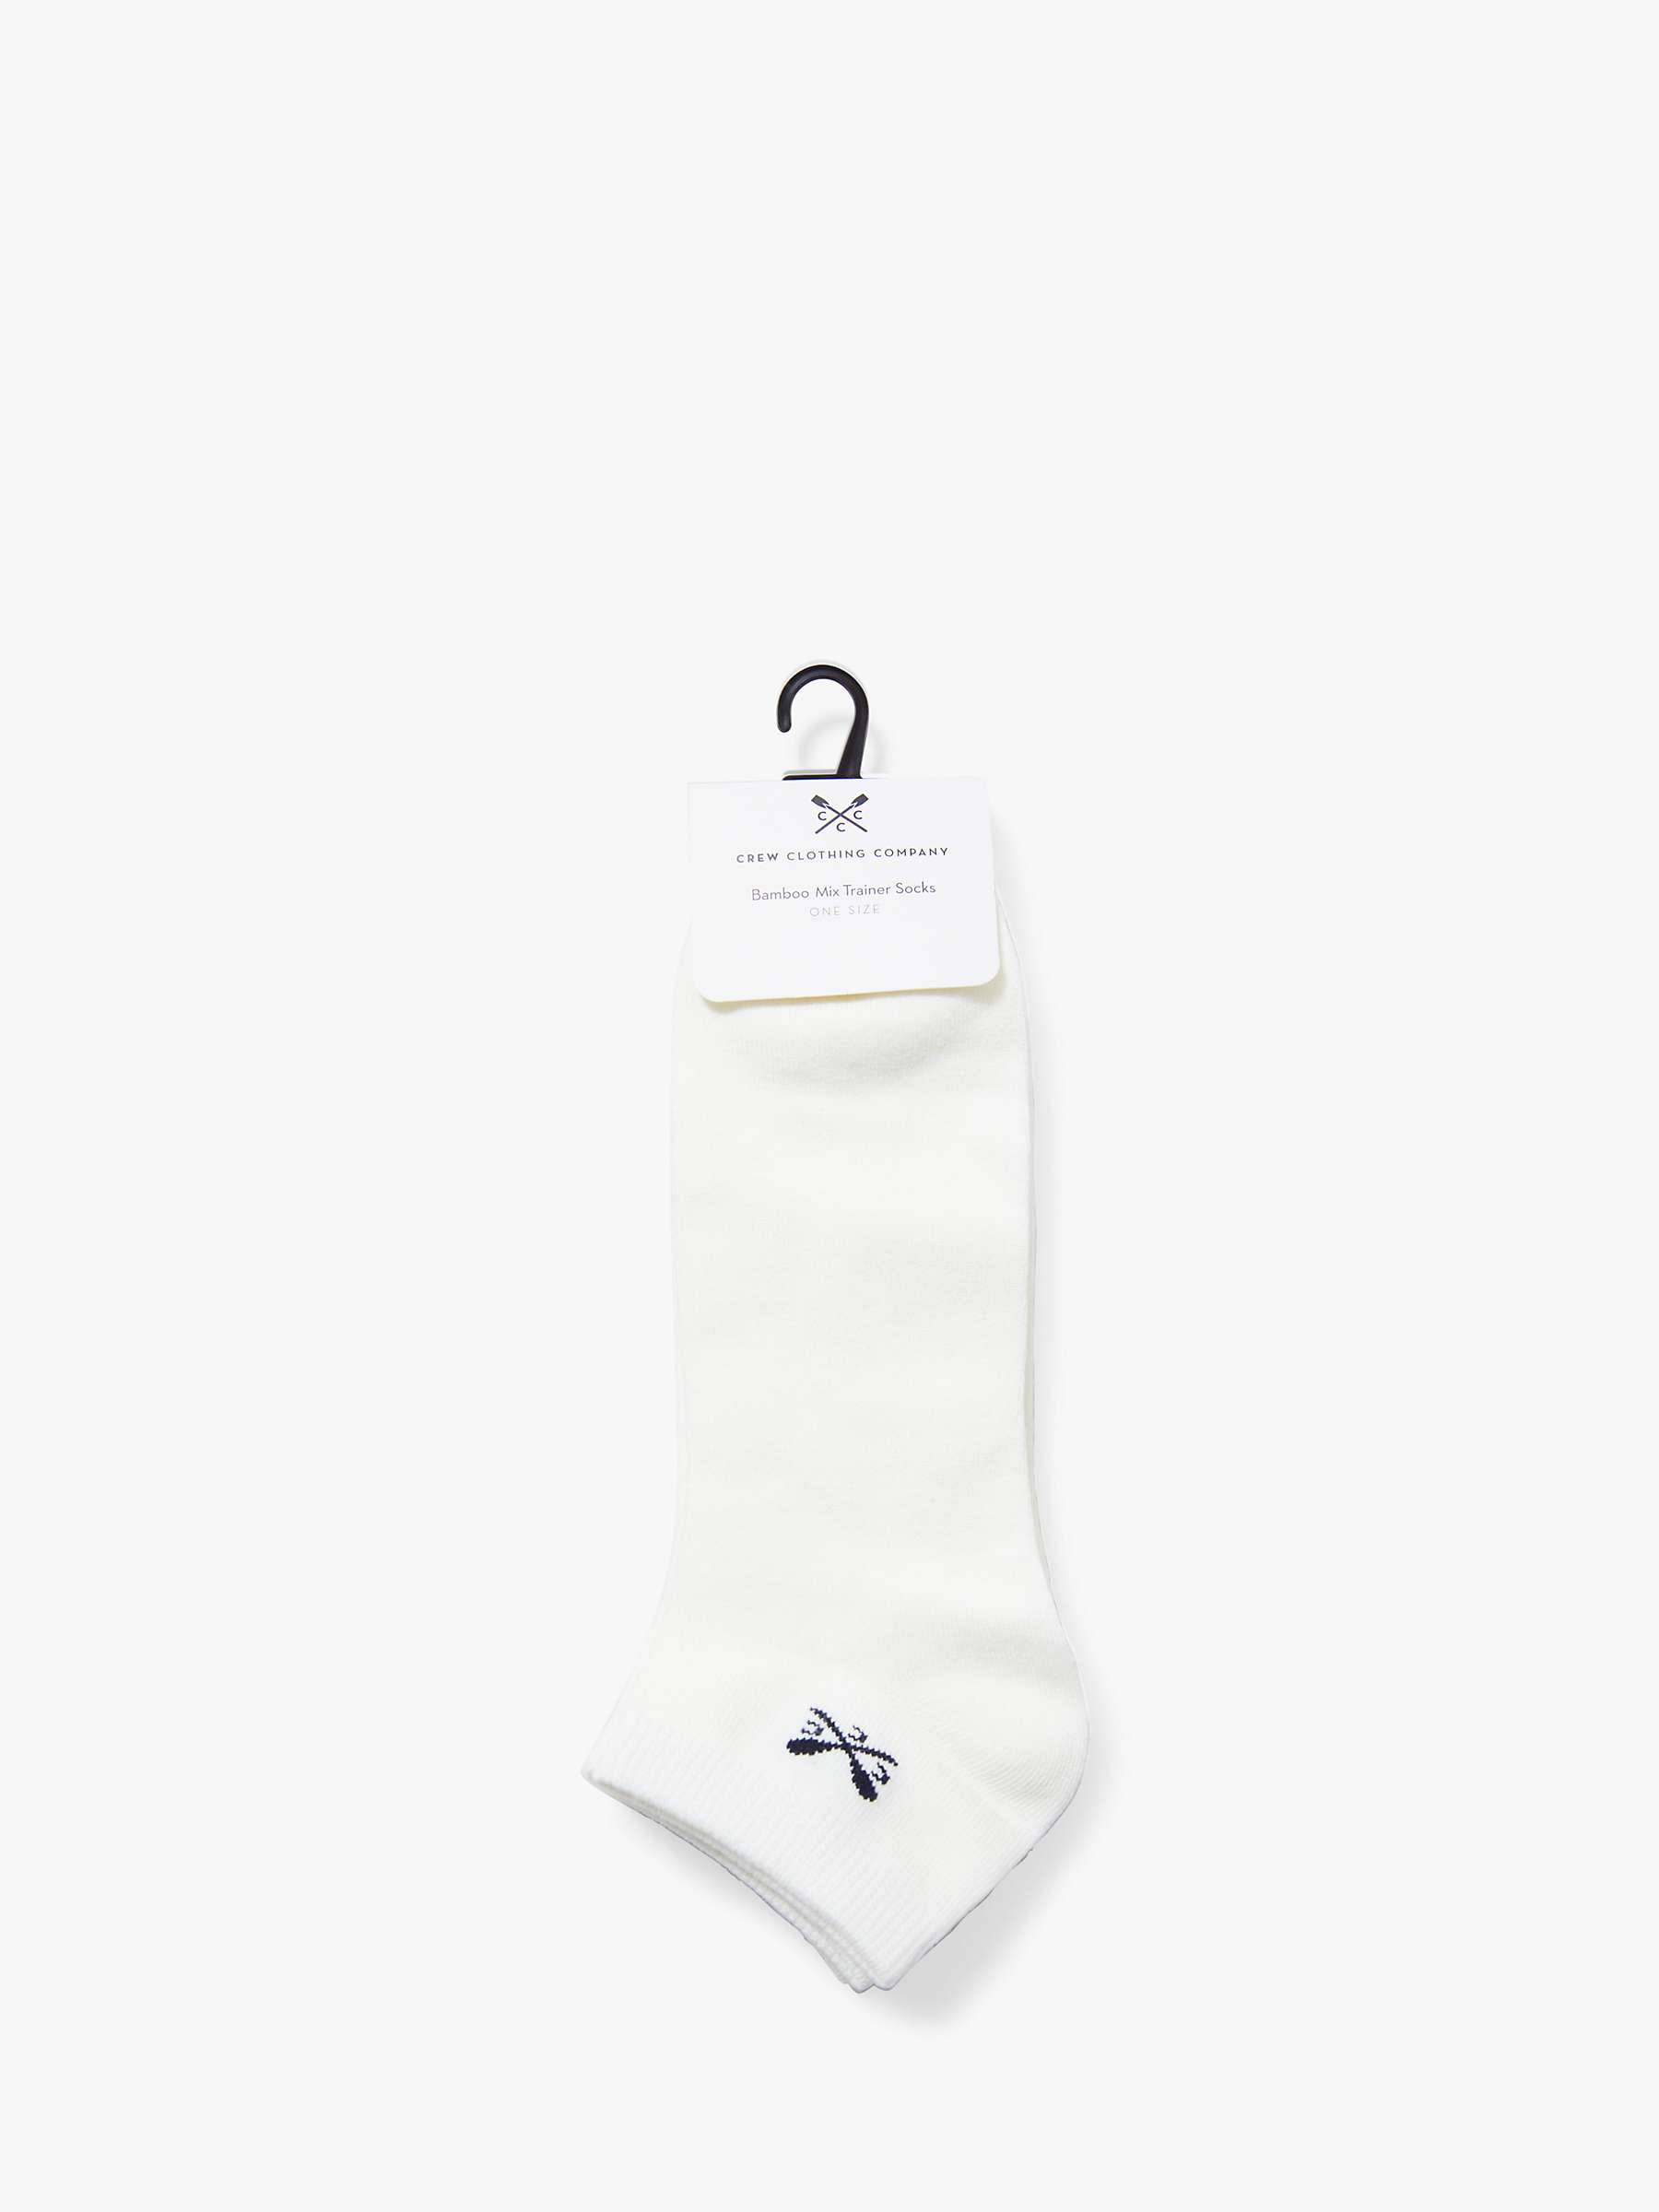 Buy Crew Clothing Bamboo Trainer Socks, Pack of 3, White Online at johnlewis.com